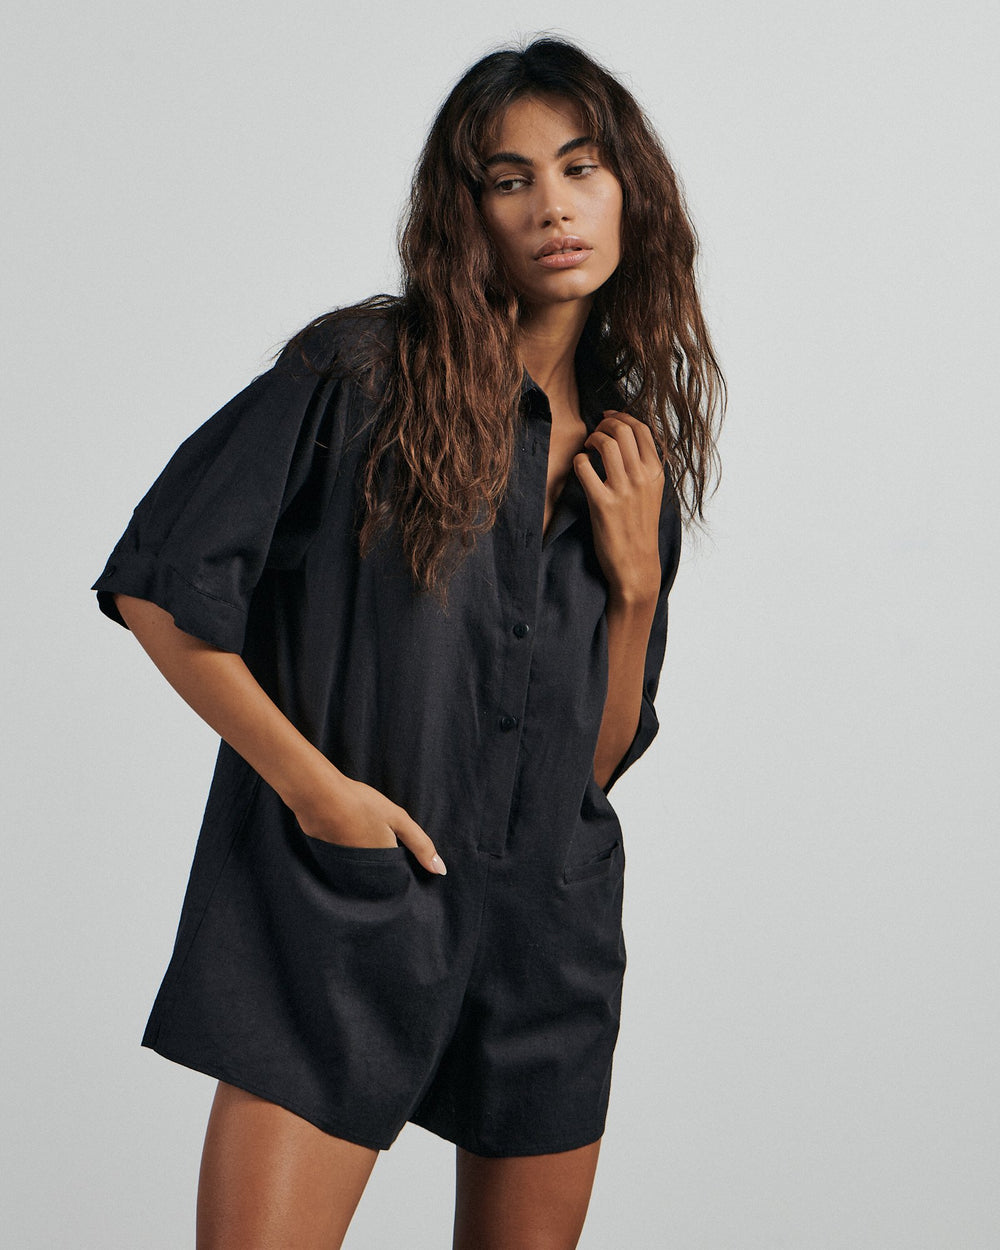 The Casual Playsuit